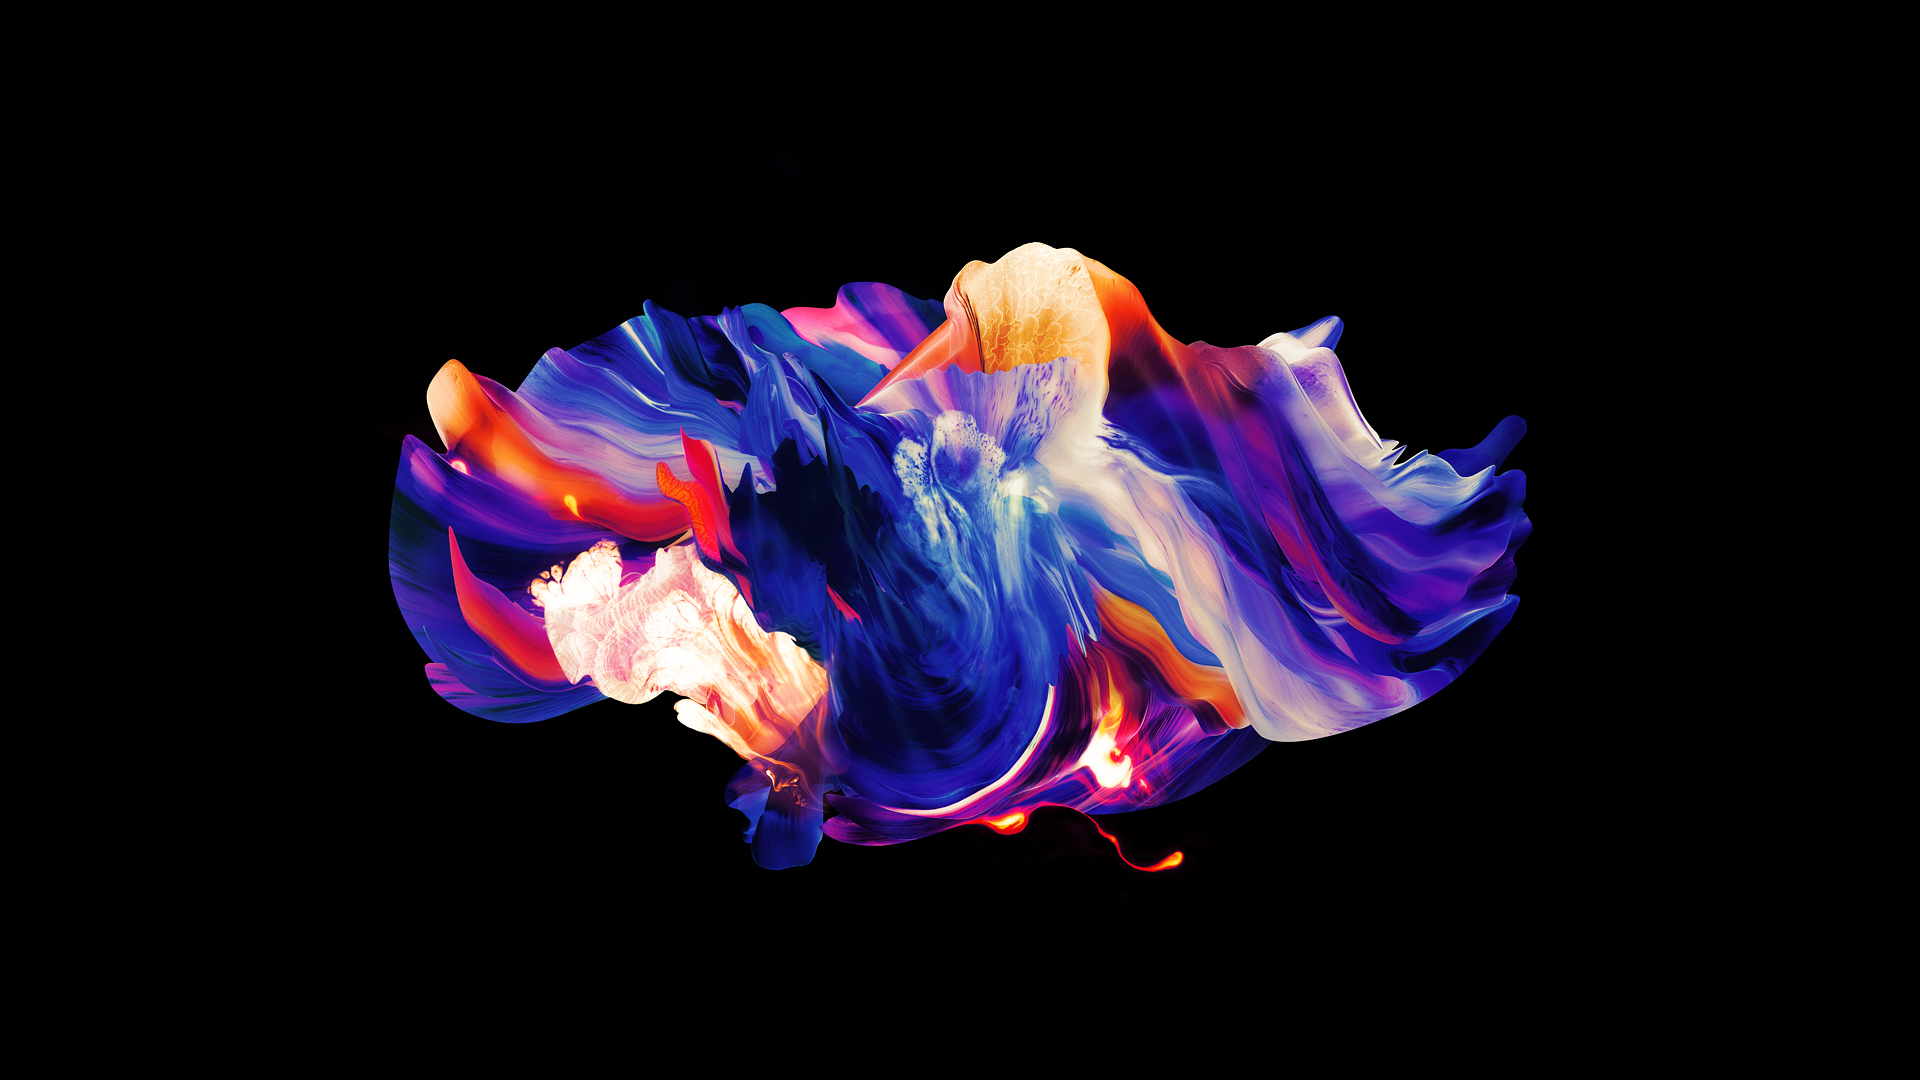 Wallpaper ID: 43738 / OnePlus 7T Pro, abstract, 4K free download